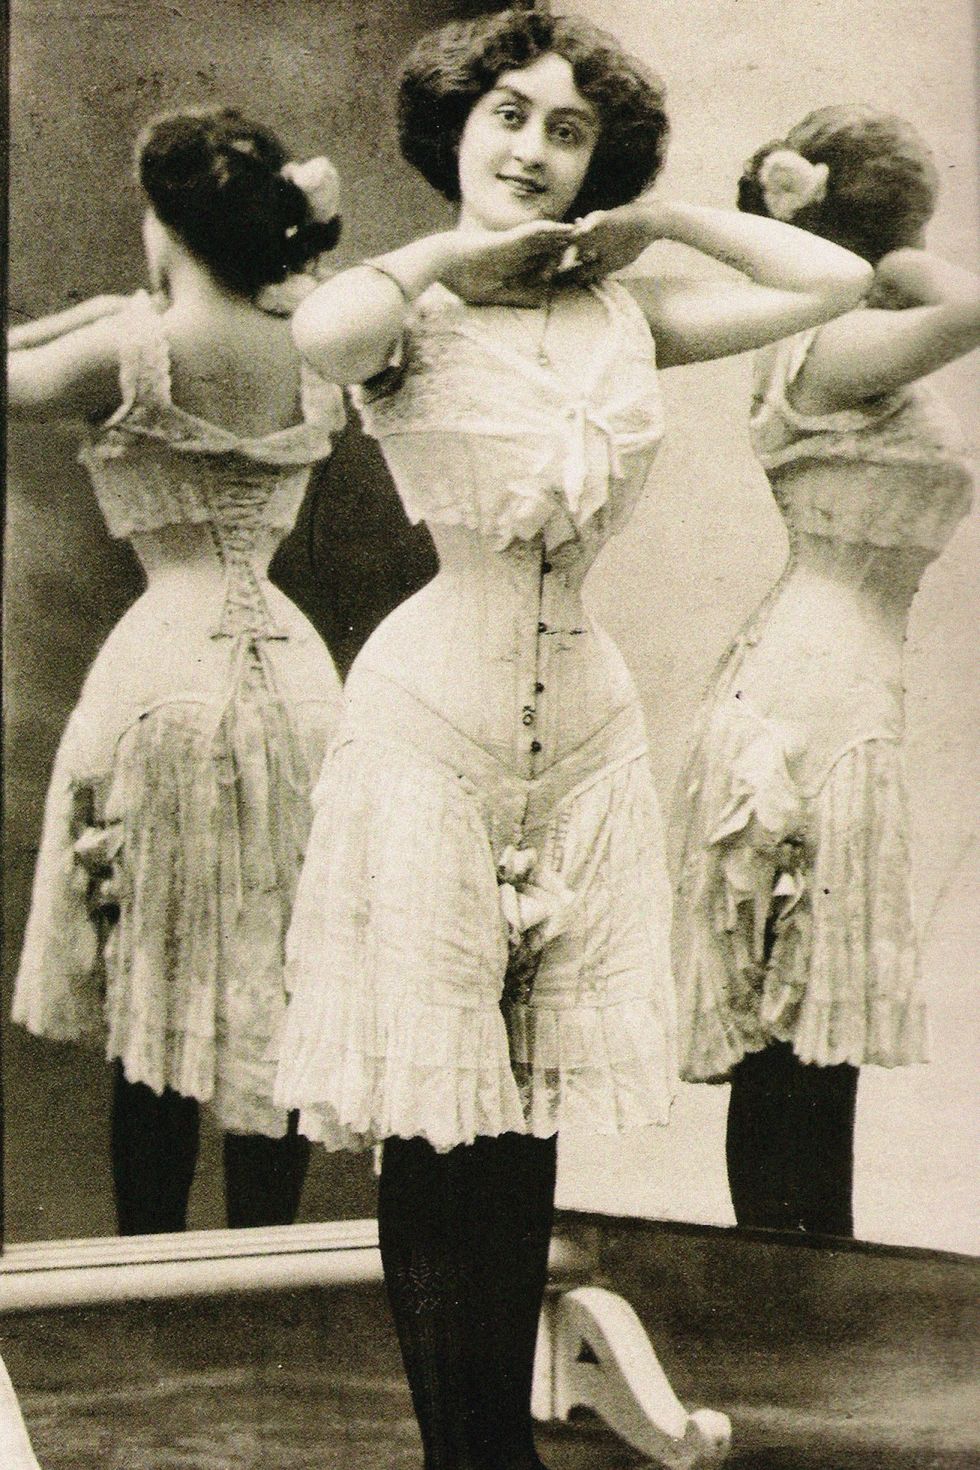 All The Pretty Dresses: Cute Knickers from the Turn of the Century